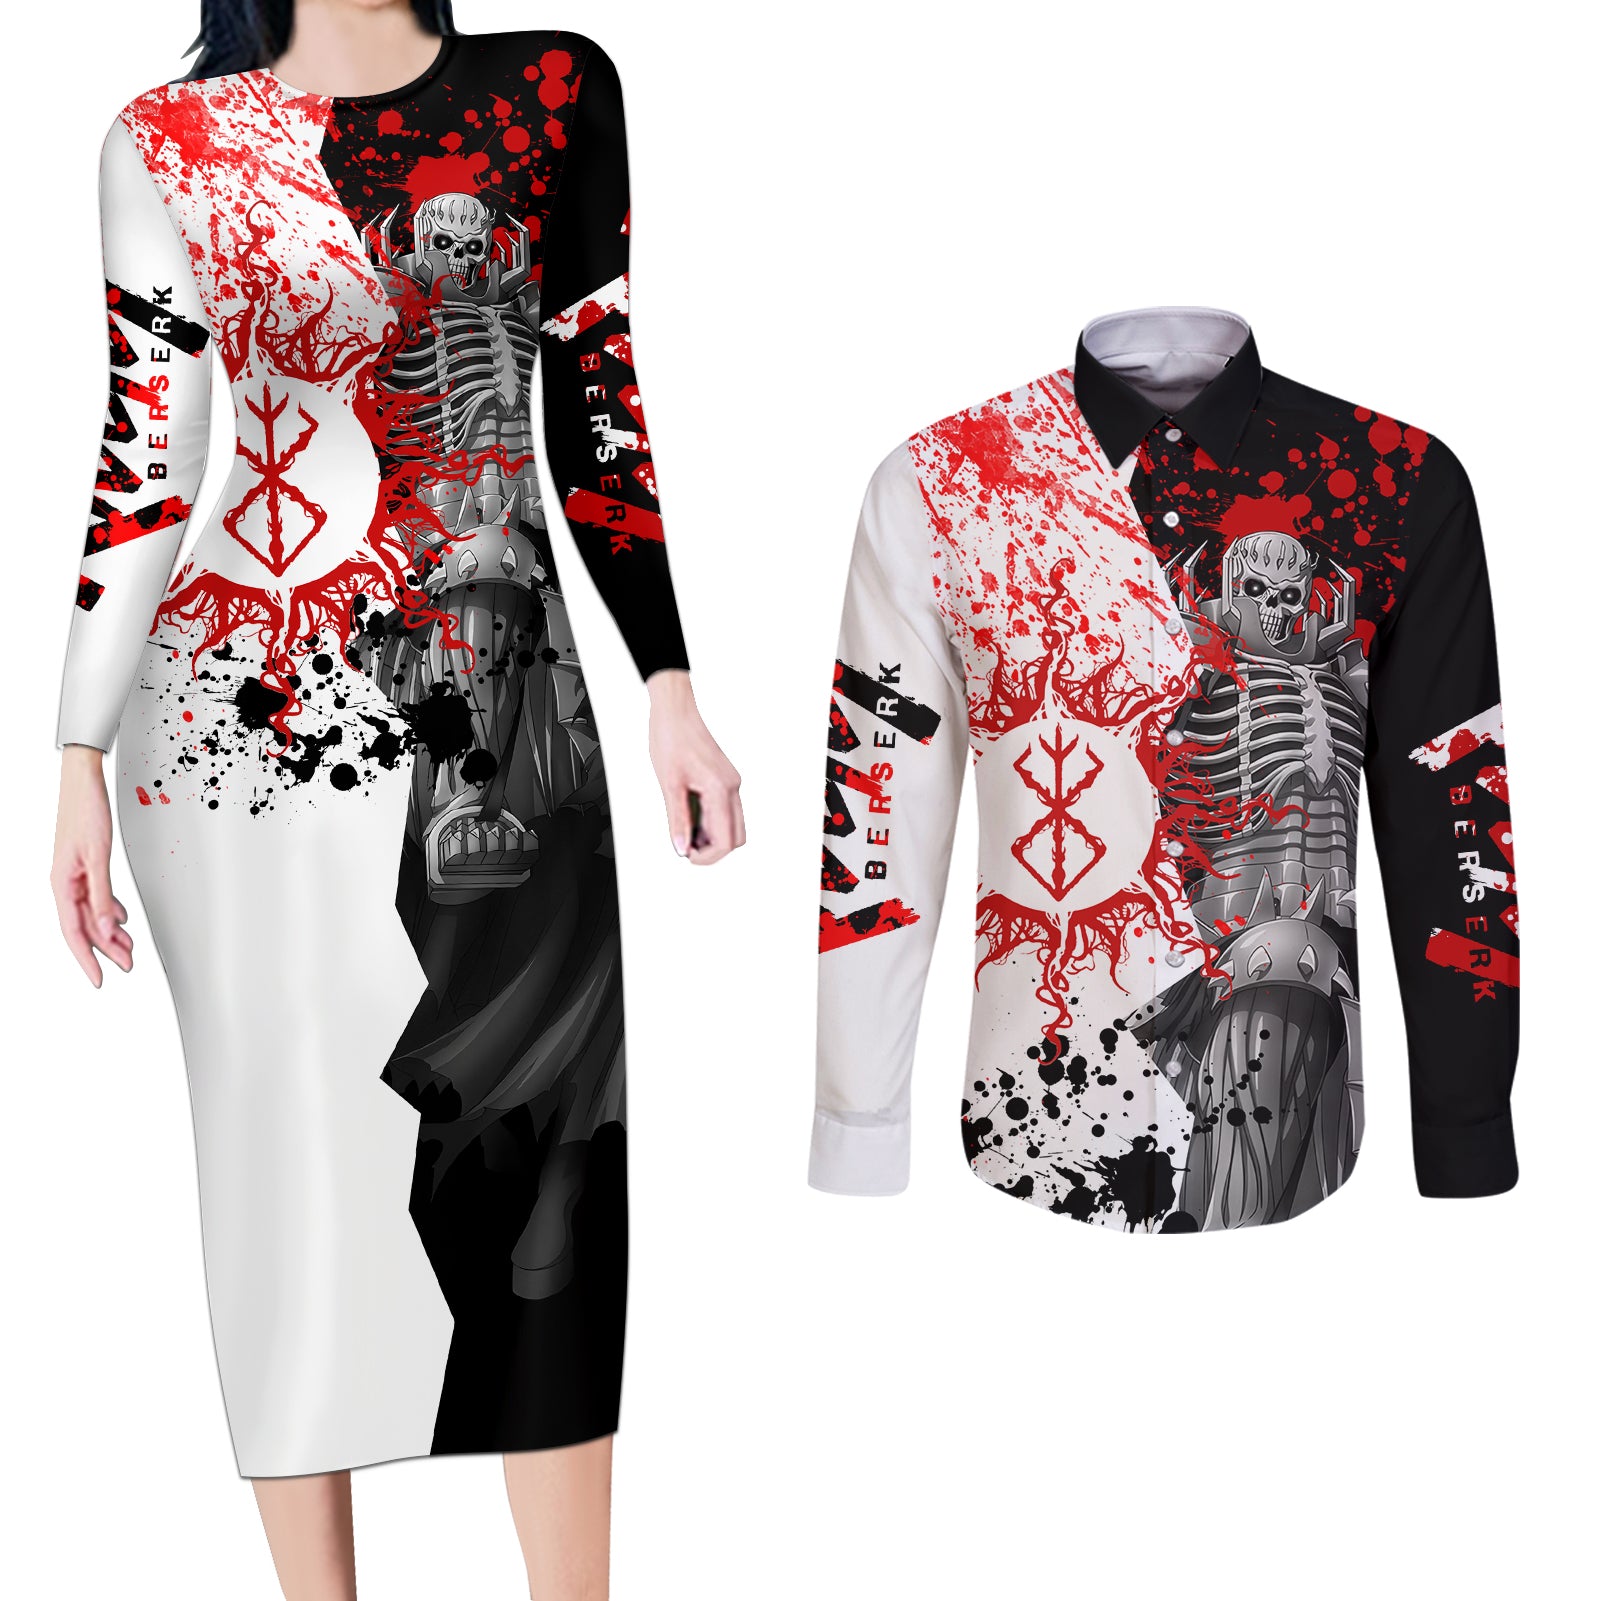 The Skull Knight Berserk Couples Matching Long Sleeve Bodycon Dress and Long Sleeve Button Shirt Anime Japan Style